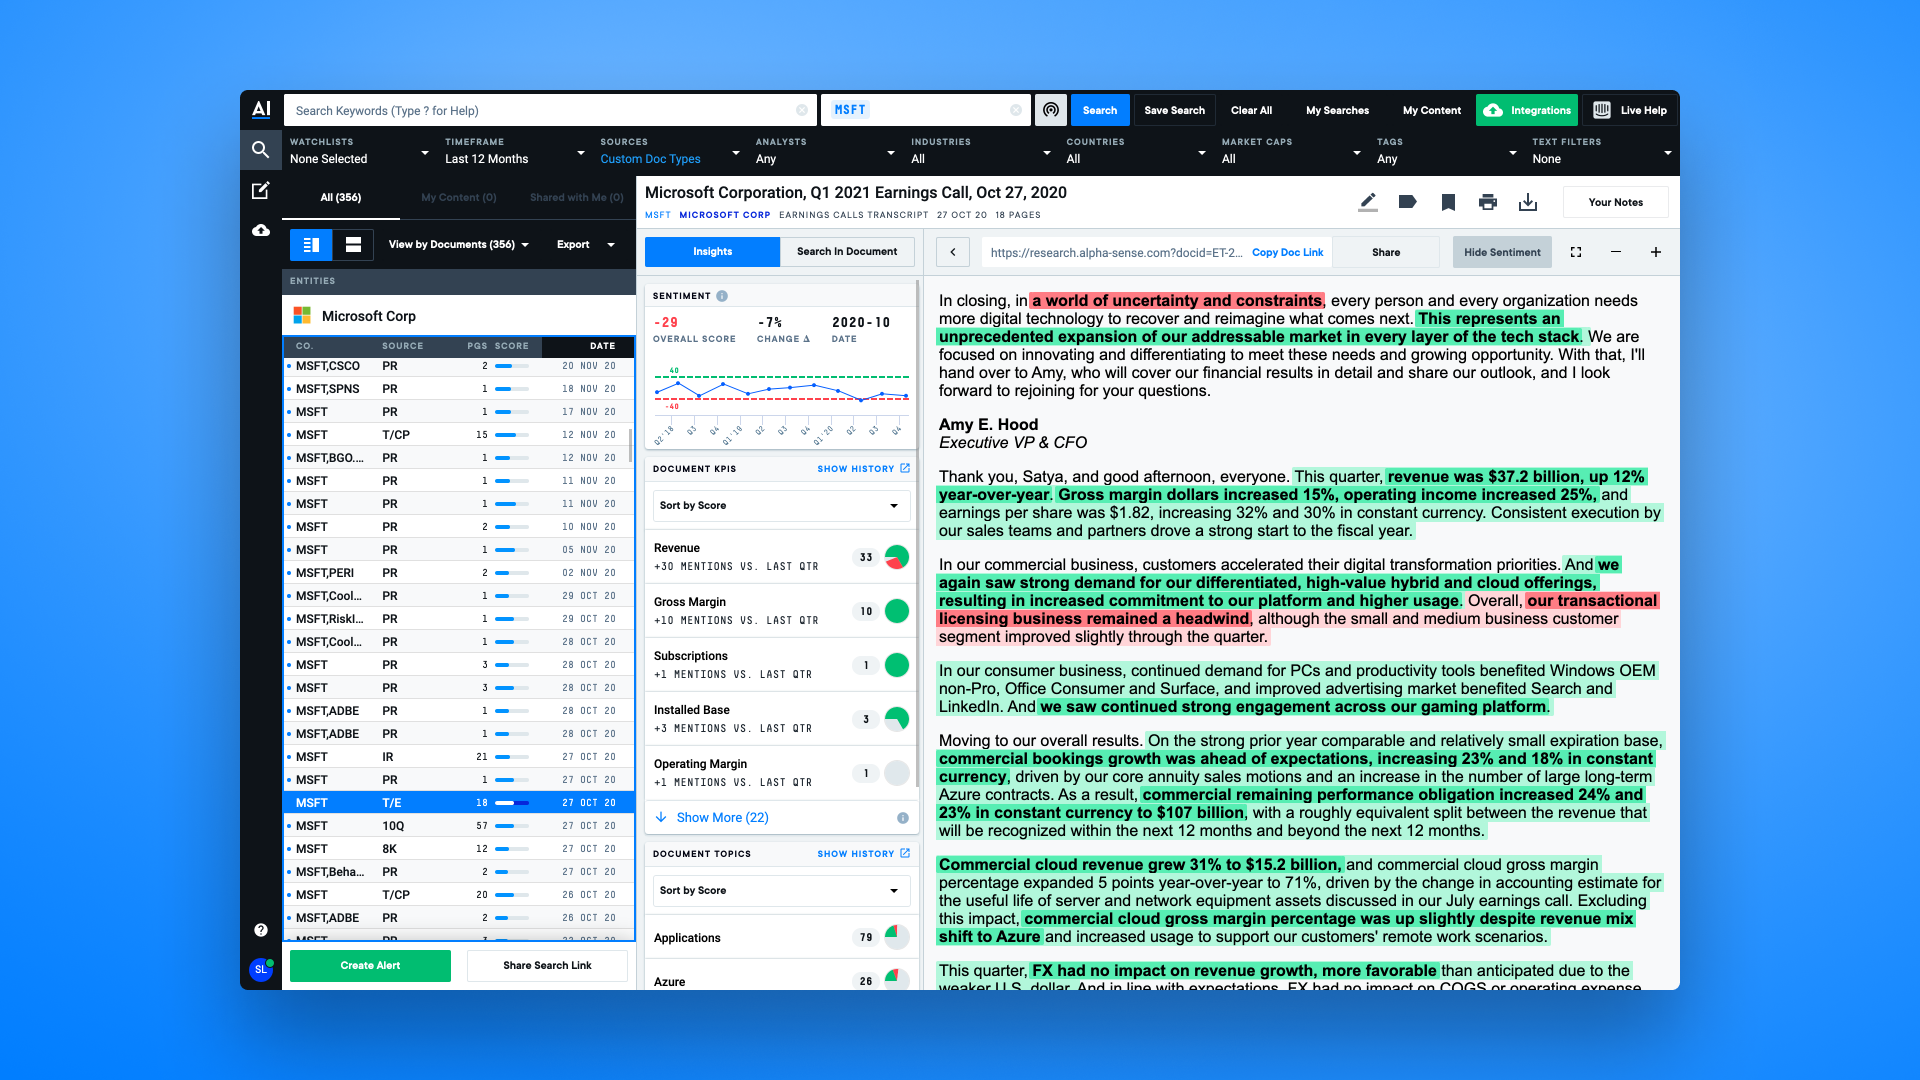 Stay ahead of market-moving trends and instantly surface critical information buried within millions of documents. Use AI to search across 2,000+ premium business data sources including SEC filings, earnings calls, broker research, journals and news.